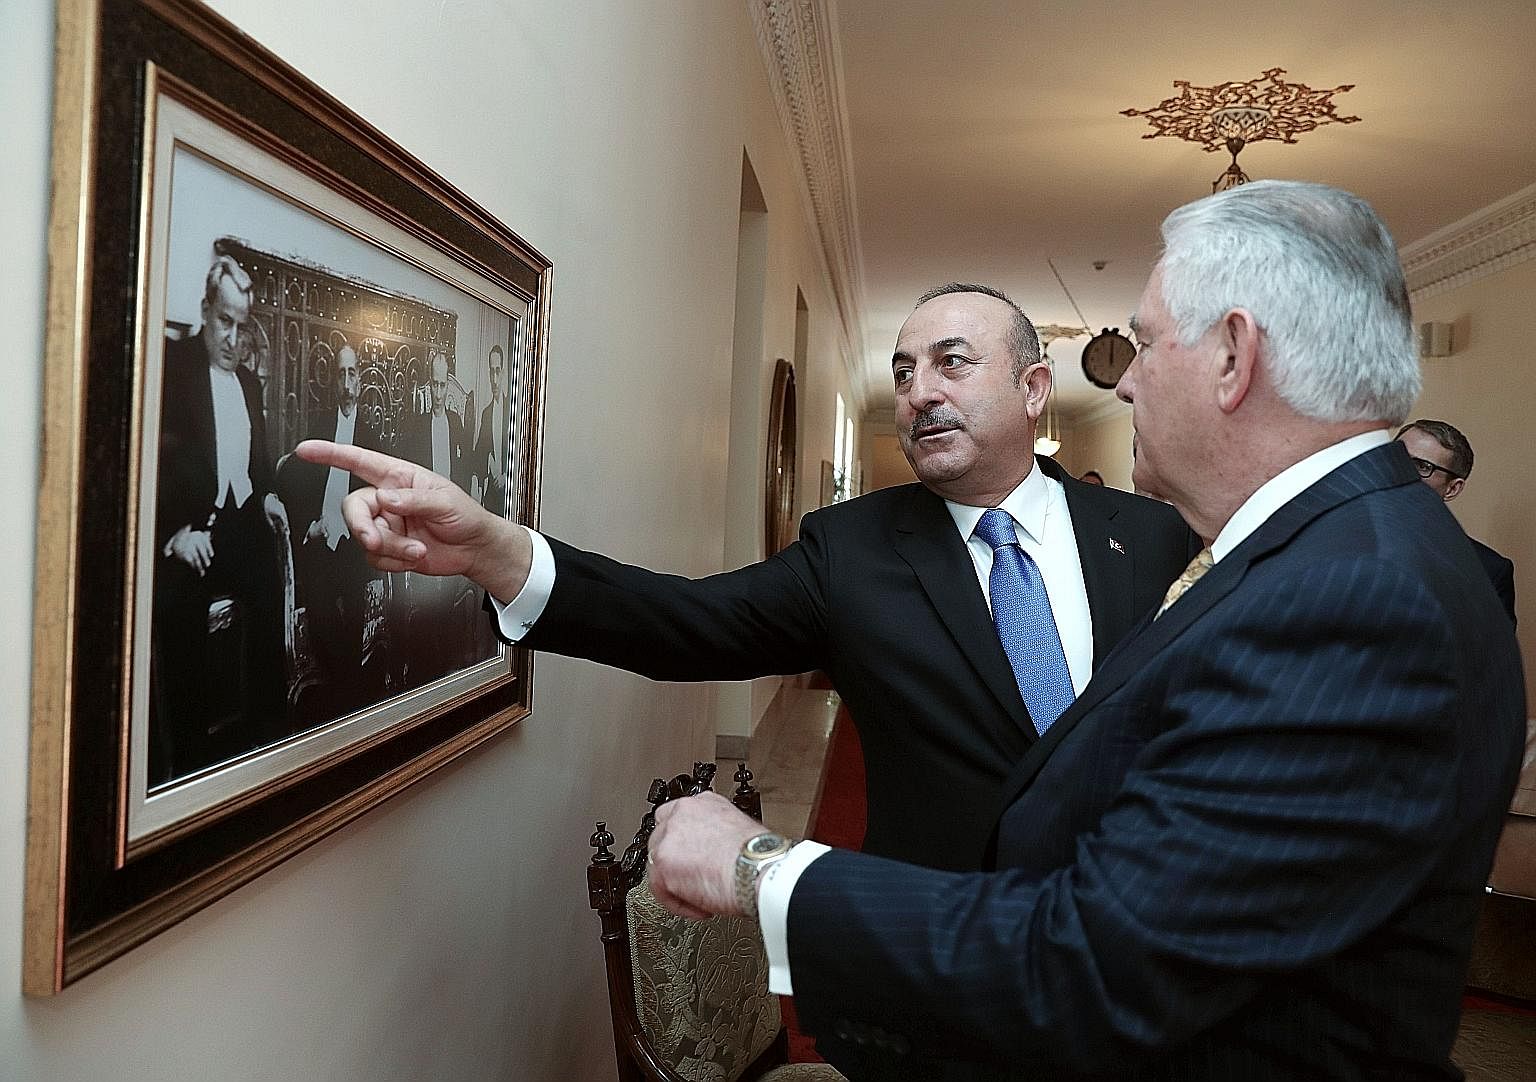 United States Secretary of State Rex Tillerson being shown a picture of the founder of modern Turkey, Mustafa Kemal Ataturk, by Turkish Foreign Minister Mevlut Cavusoglu last Friday. Mr Tillerson's main focus during his stopover in Ankara was the str